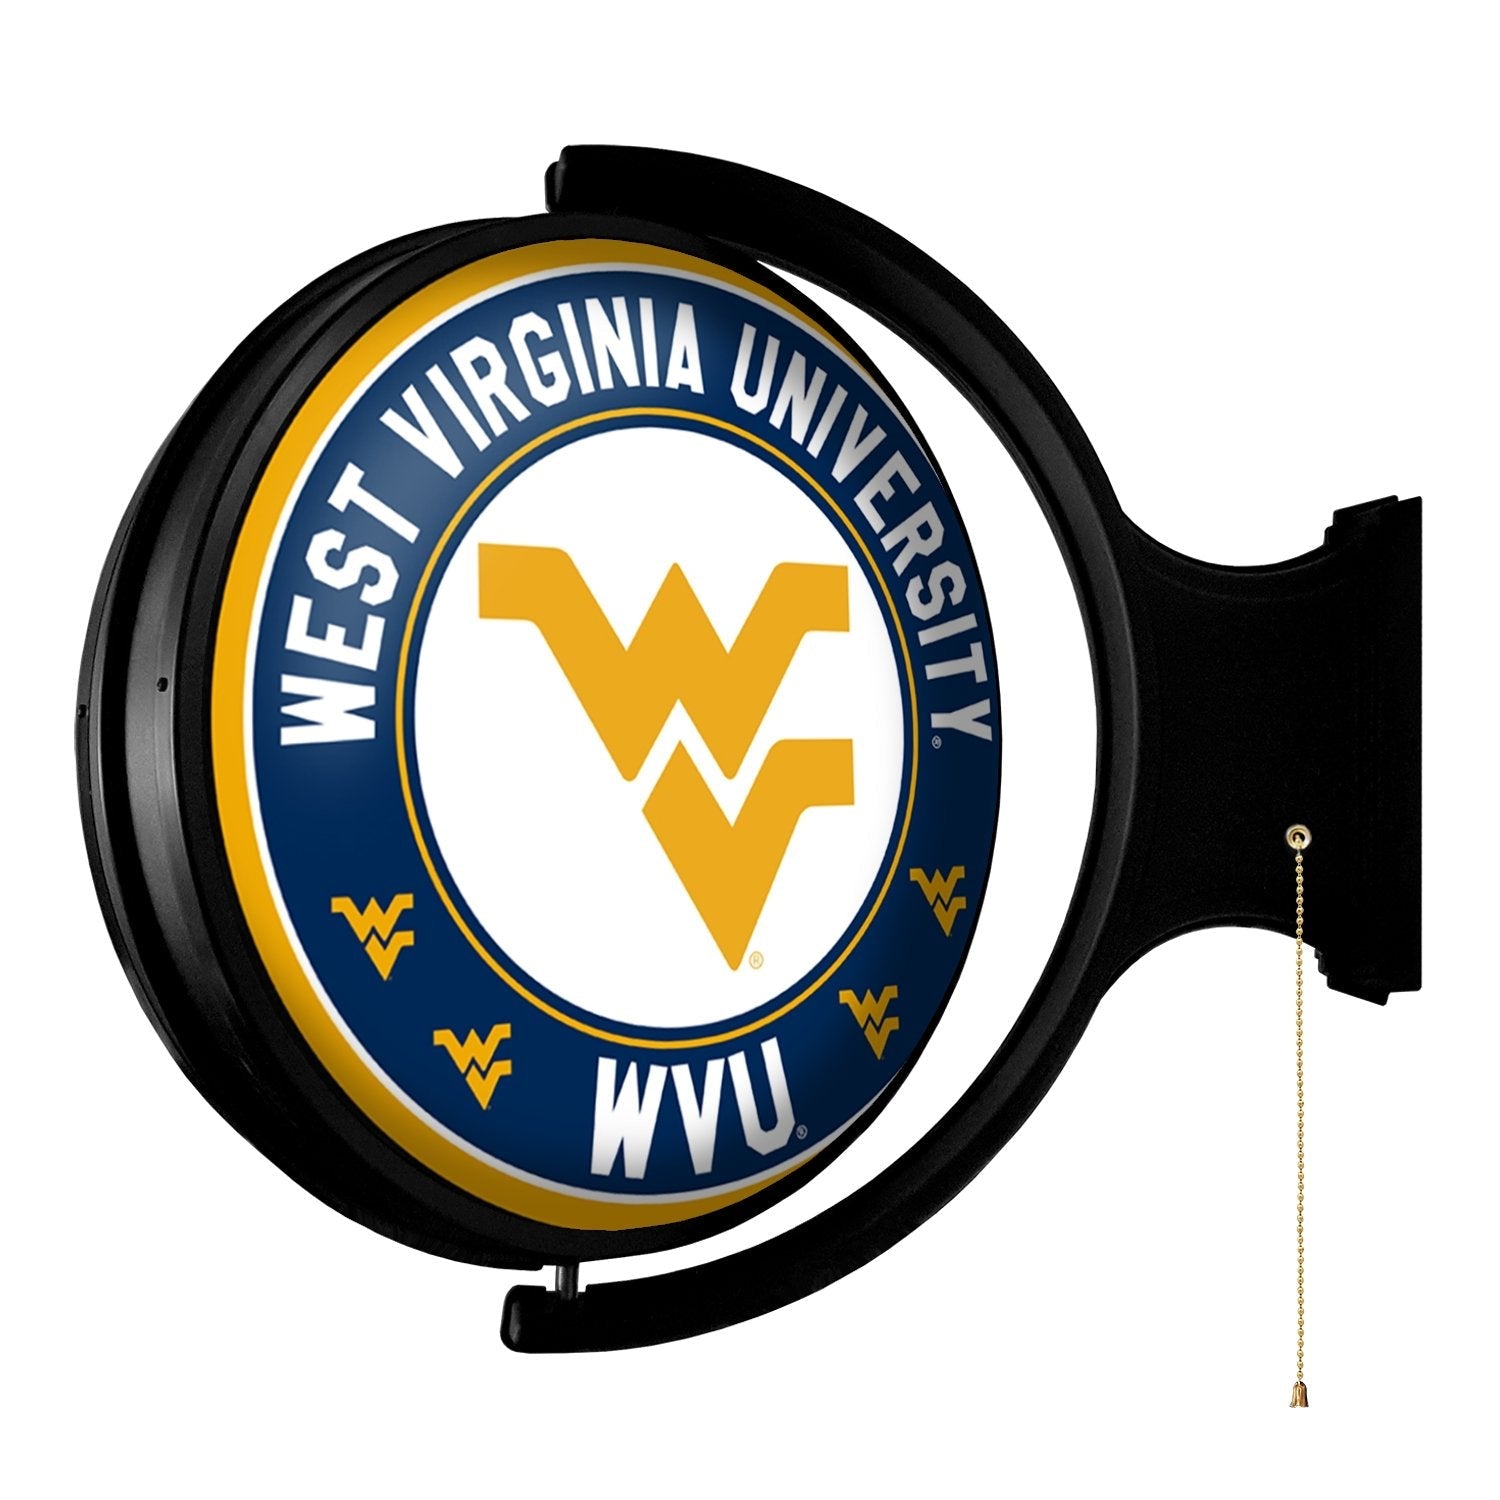 West Virginia Mountaineers: Original Round Rotating Lighted Wall Sign - The Fan-Brand